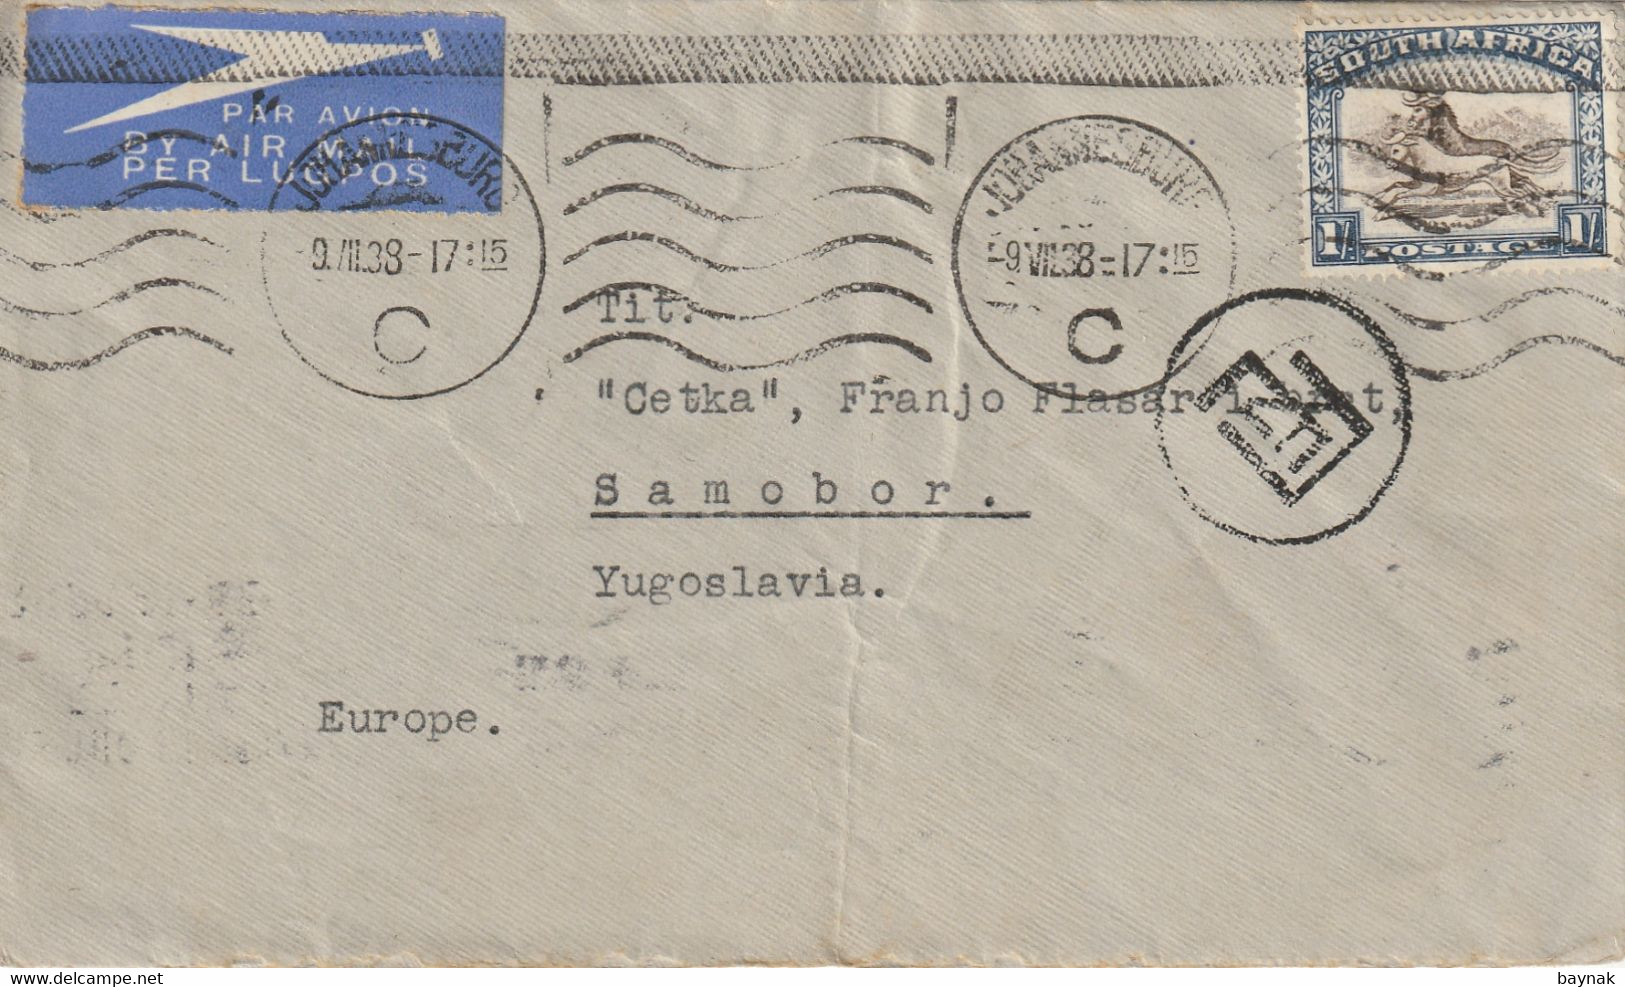 SOUTH   AFRICA  --  BRIEF  --   BY AIR MAIL  --   1938  --  JOHANNESBURG  TO ZAGREB, CROATIA - Poste Aérienne